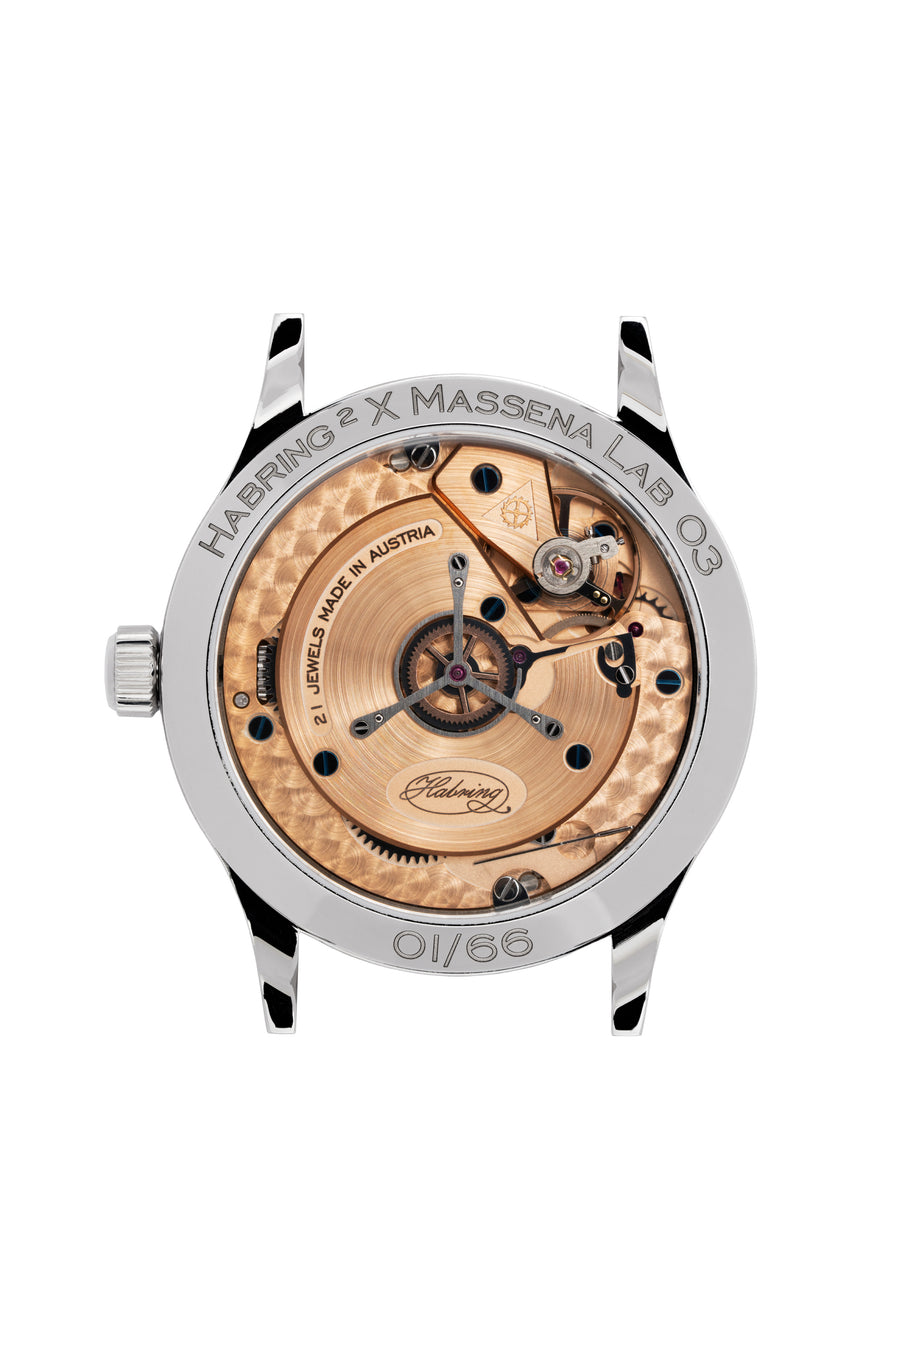 The Massena LAB x Habring² ERWIN LAB03 is powered by the Habring² caliber A11MS hand-wound movement.